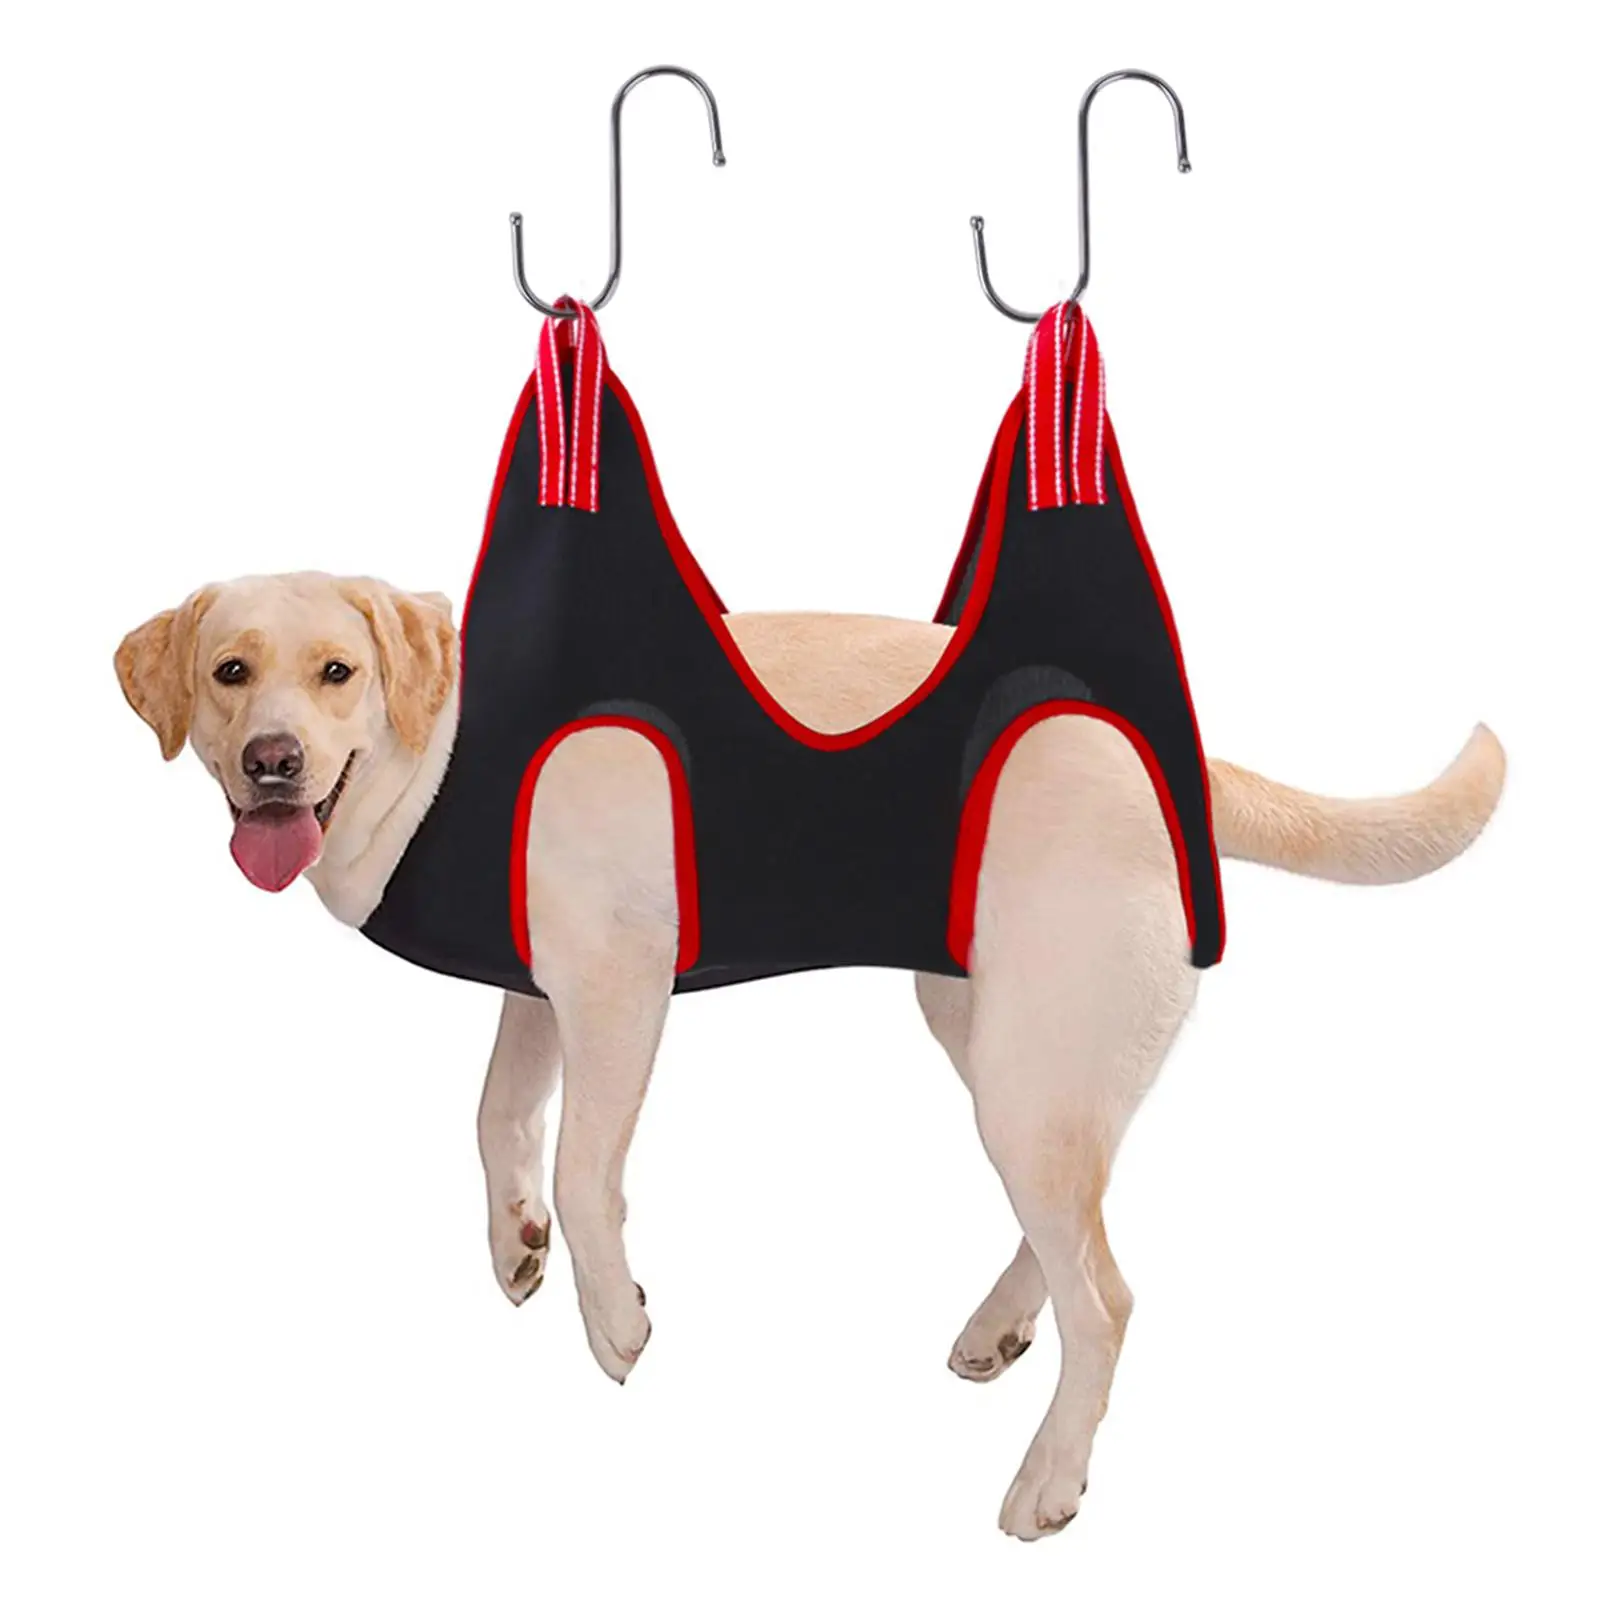 Small Dog Grooming Hammock,Dog Nail Trimming Harness,Restrict for Quick Dog Bath,Drying Dog Hair, for Nail Trimming,Dog Harness